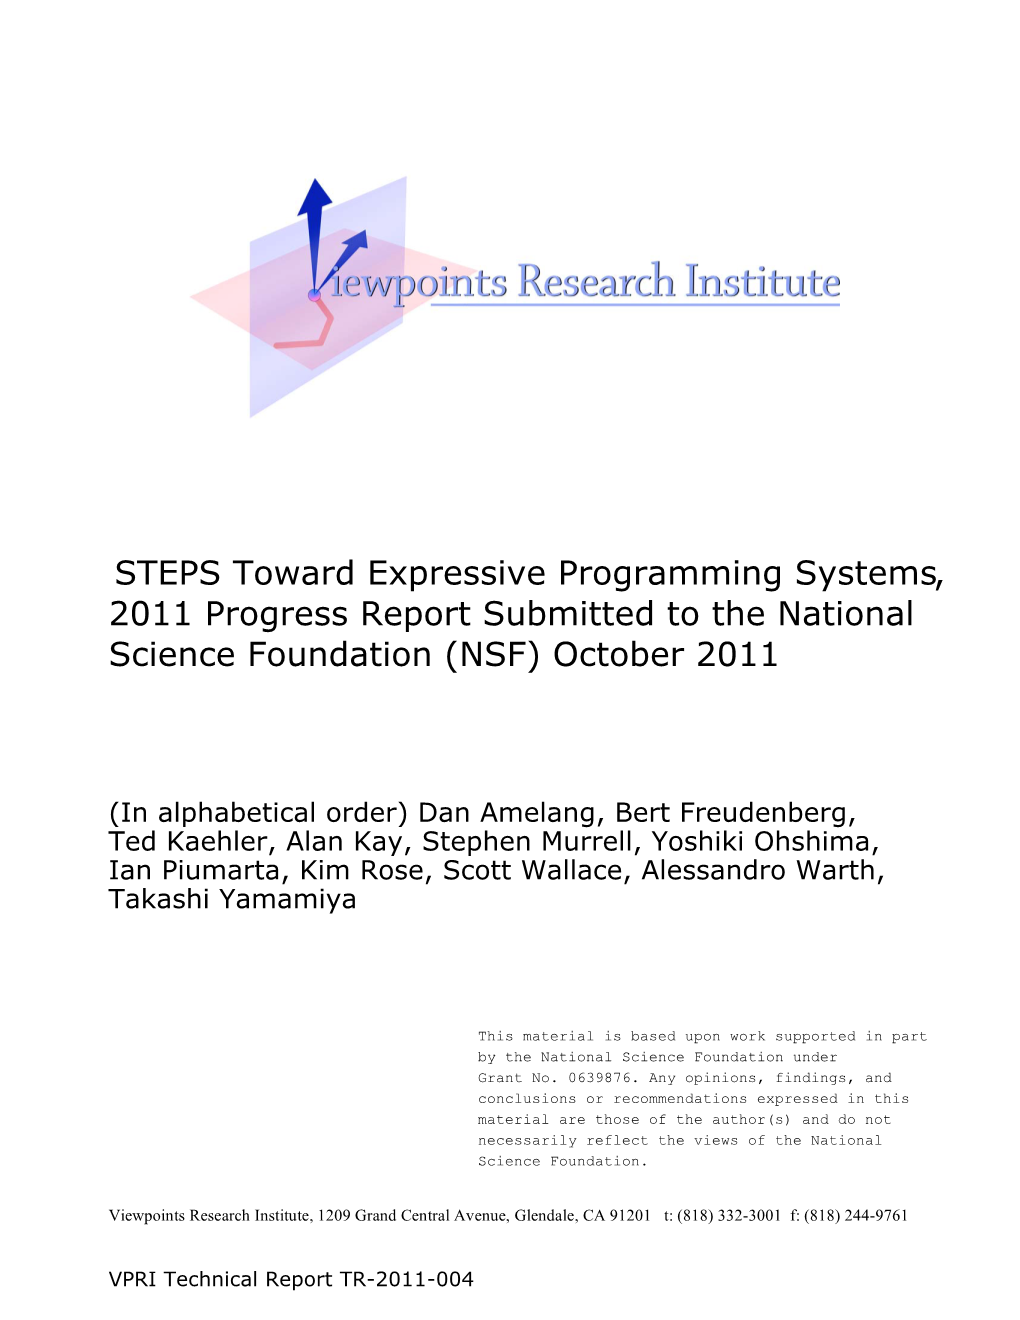 Expressive Programming Systems Viewpoints Research Institute, Glendale CA